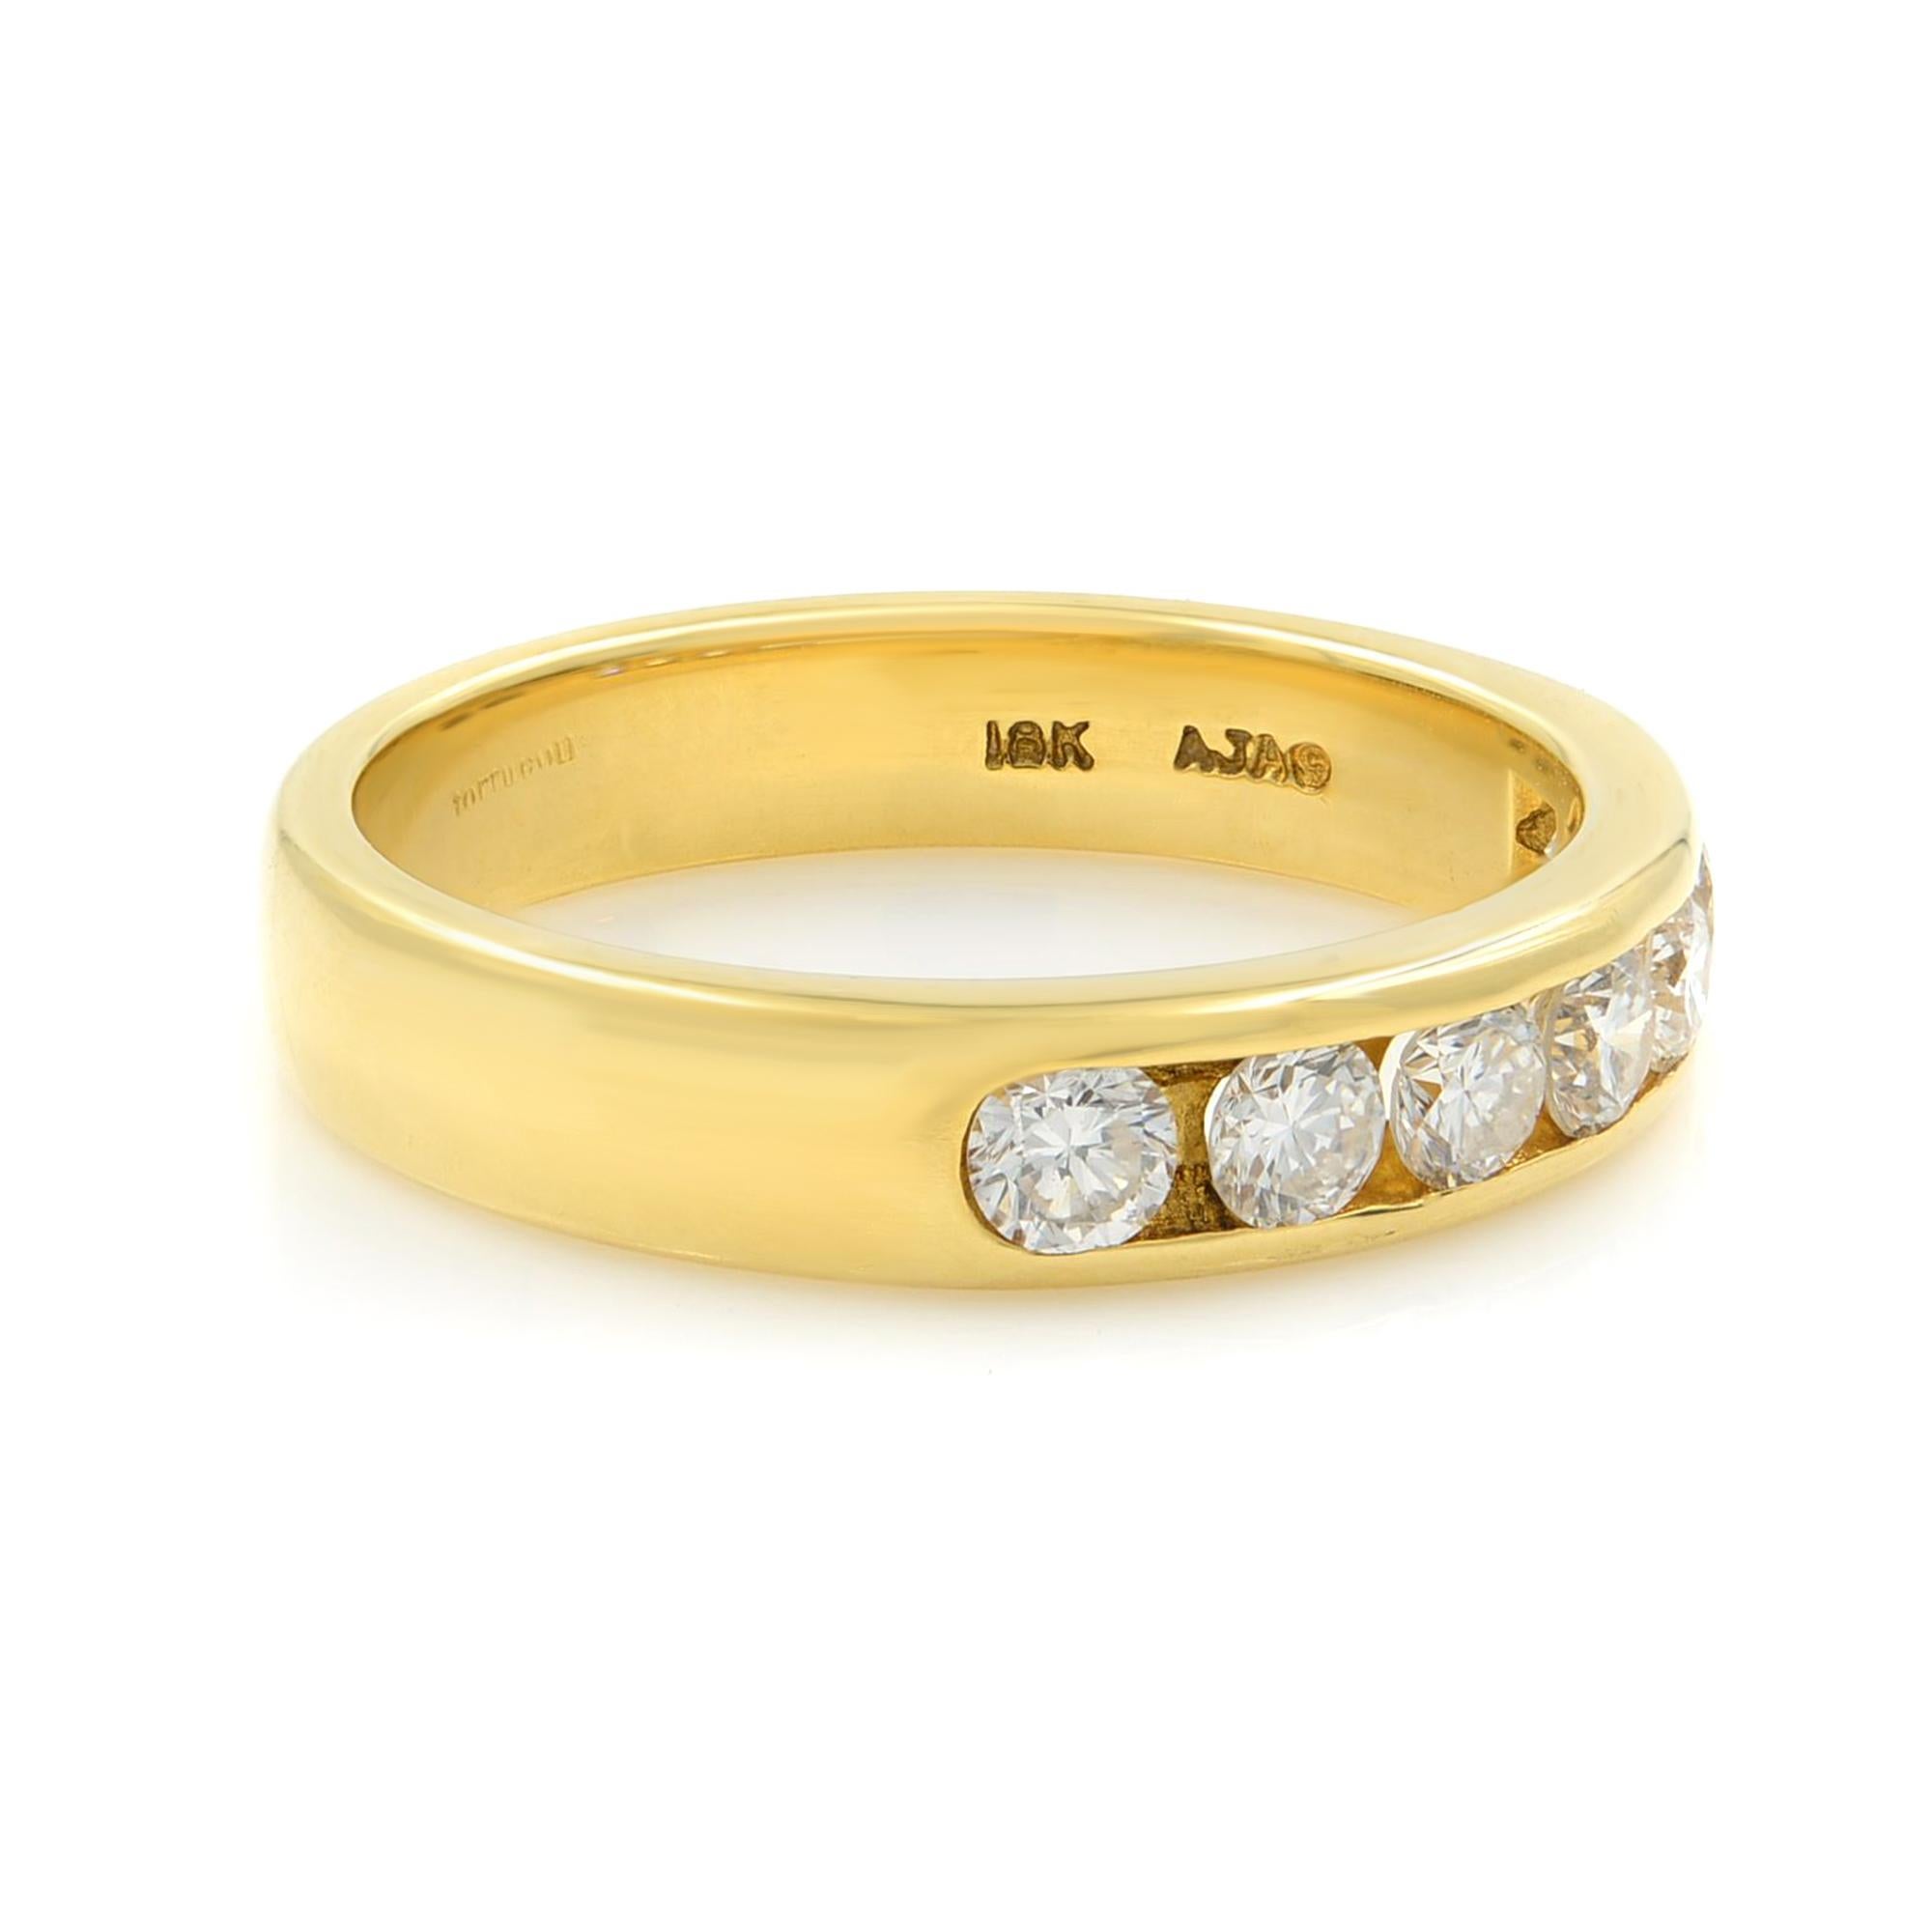 Channel Set Round Diamond Wedding Ring Band 18K Yellow Gold 0.50Cttw In New Condition For Sale In New York, NY